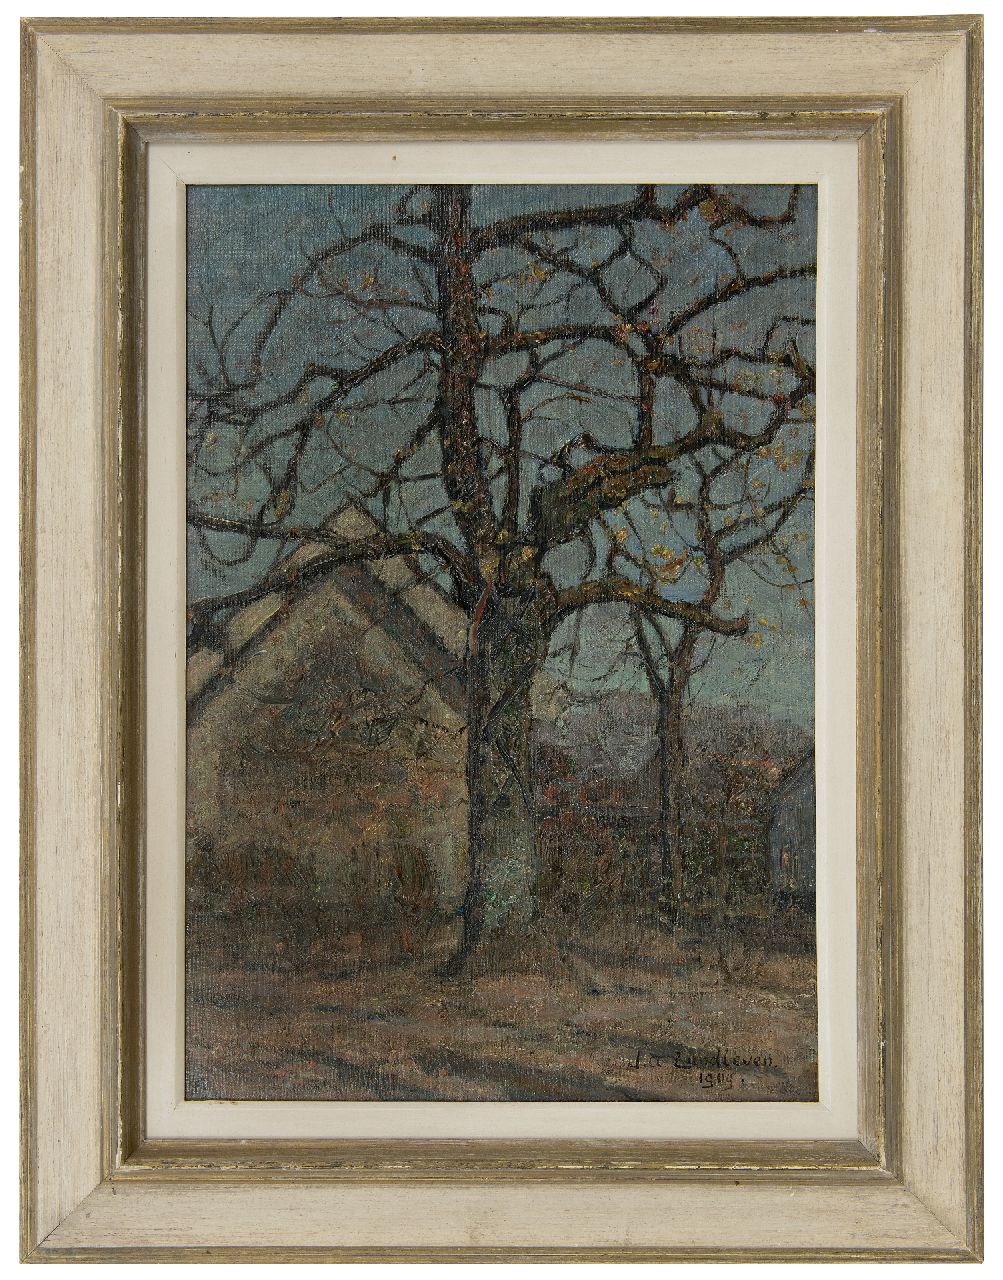 Zandleven J.A.  | Jan Adam Zandleven | Paintings offered for sale | Tree, oil on canvas laid down on board 50.5 x 35.5 cm, signed l.r. and dated 1909